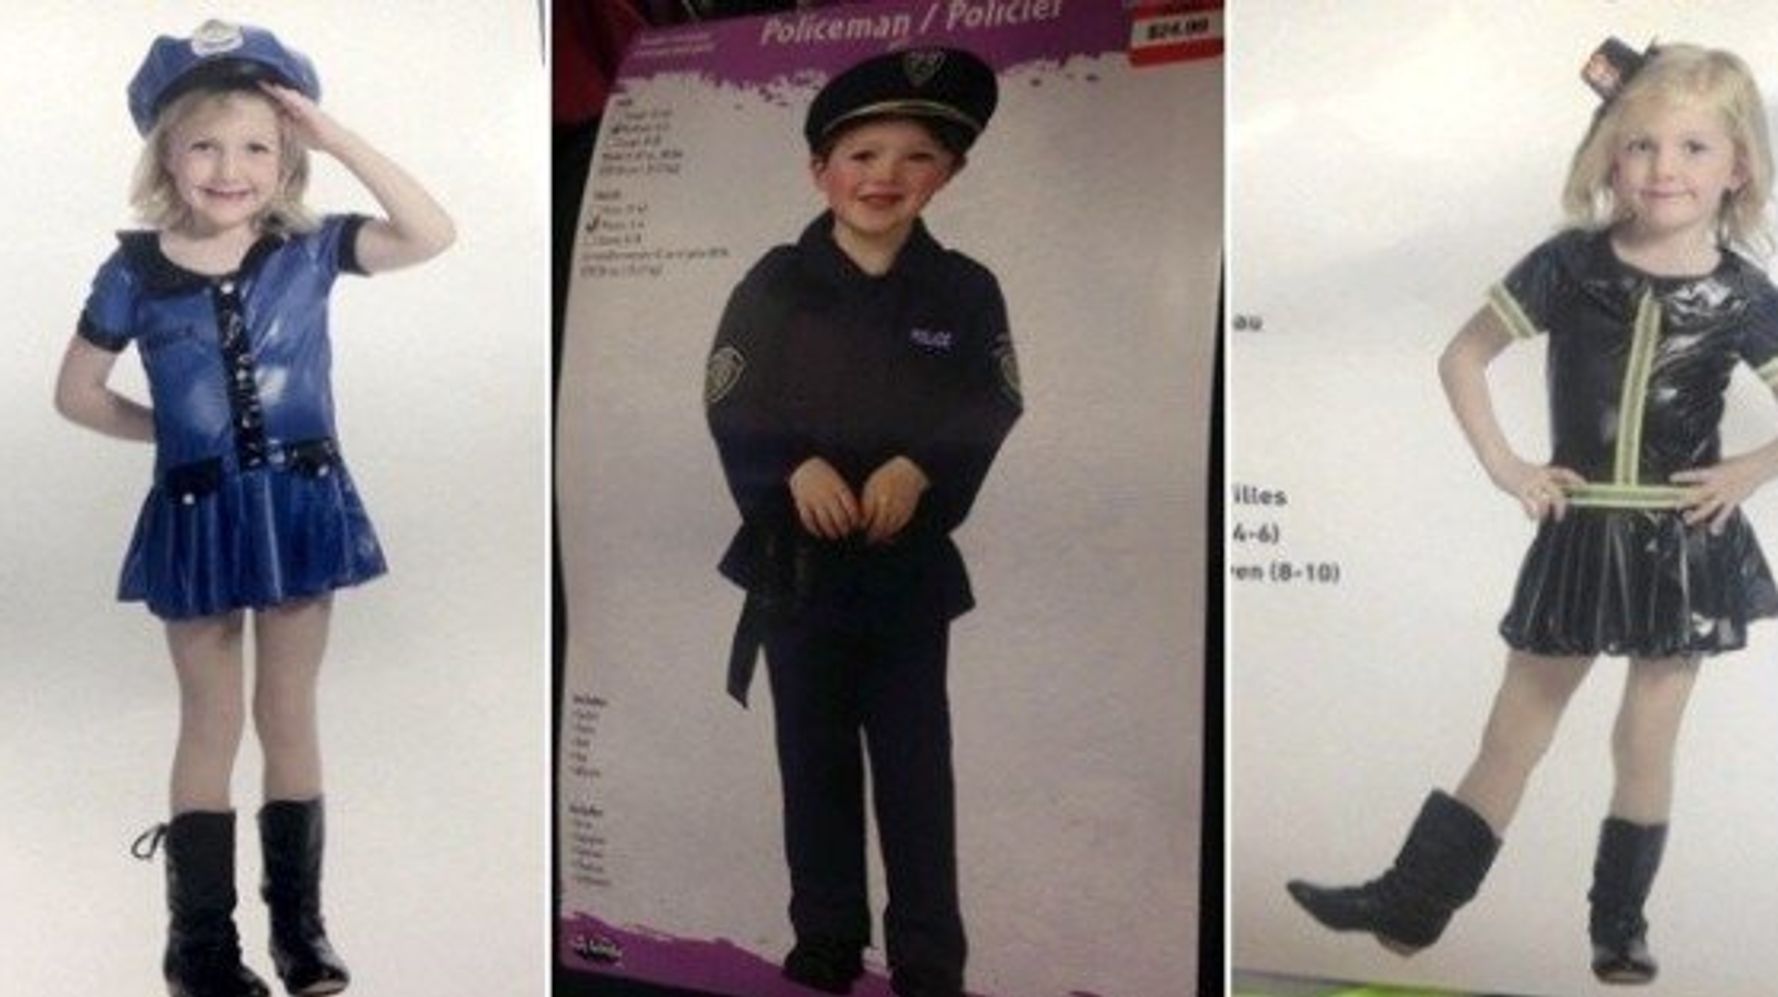 Disturbing, sexualized kids' outfits still for sale despite action from